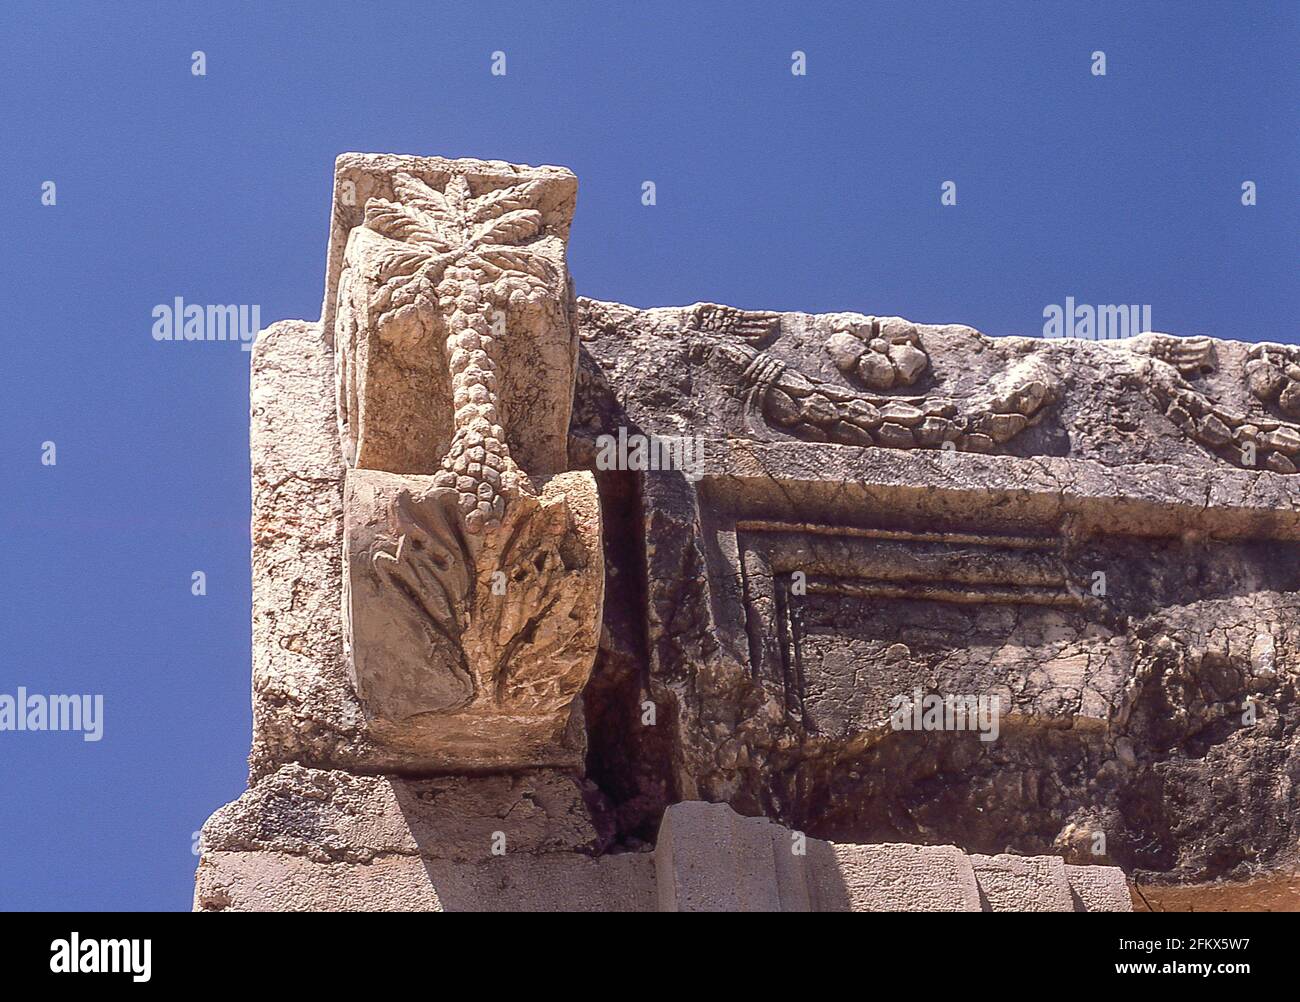 Ancient stone carving of palm tree at ruins of Great Synagogue at Capernaum (Kfar Nahum), Sea of Galilee, Northern District, Israel Stock Photo